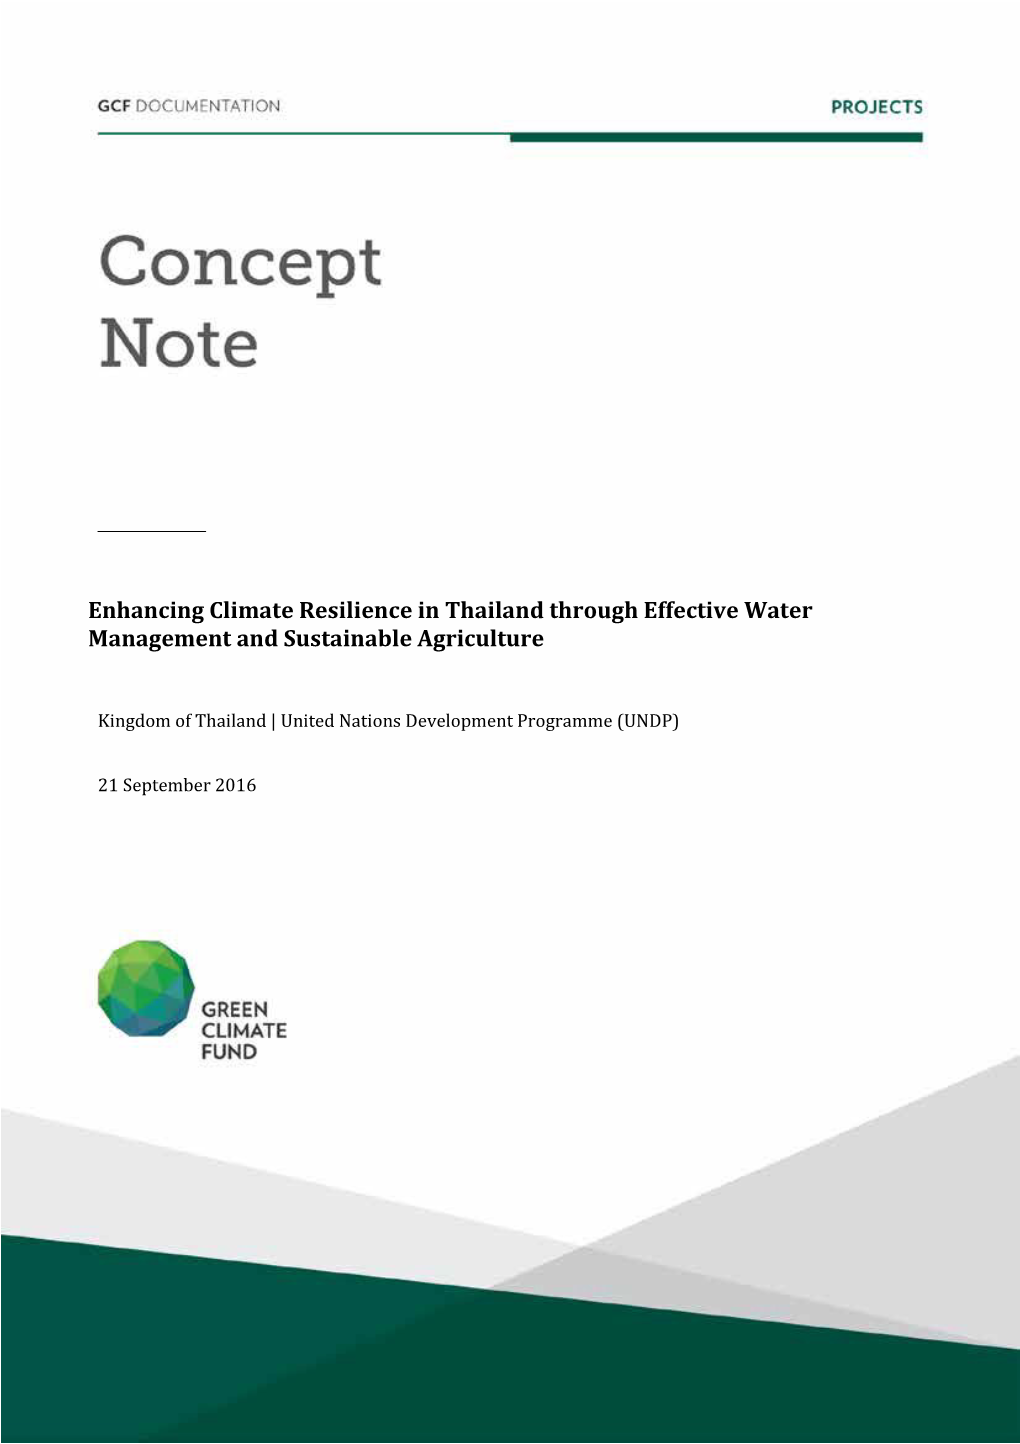 Enhancing Climate Resilience in Thailand Through Effective Water Management and Sustainable Agriculture